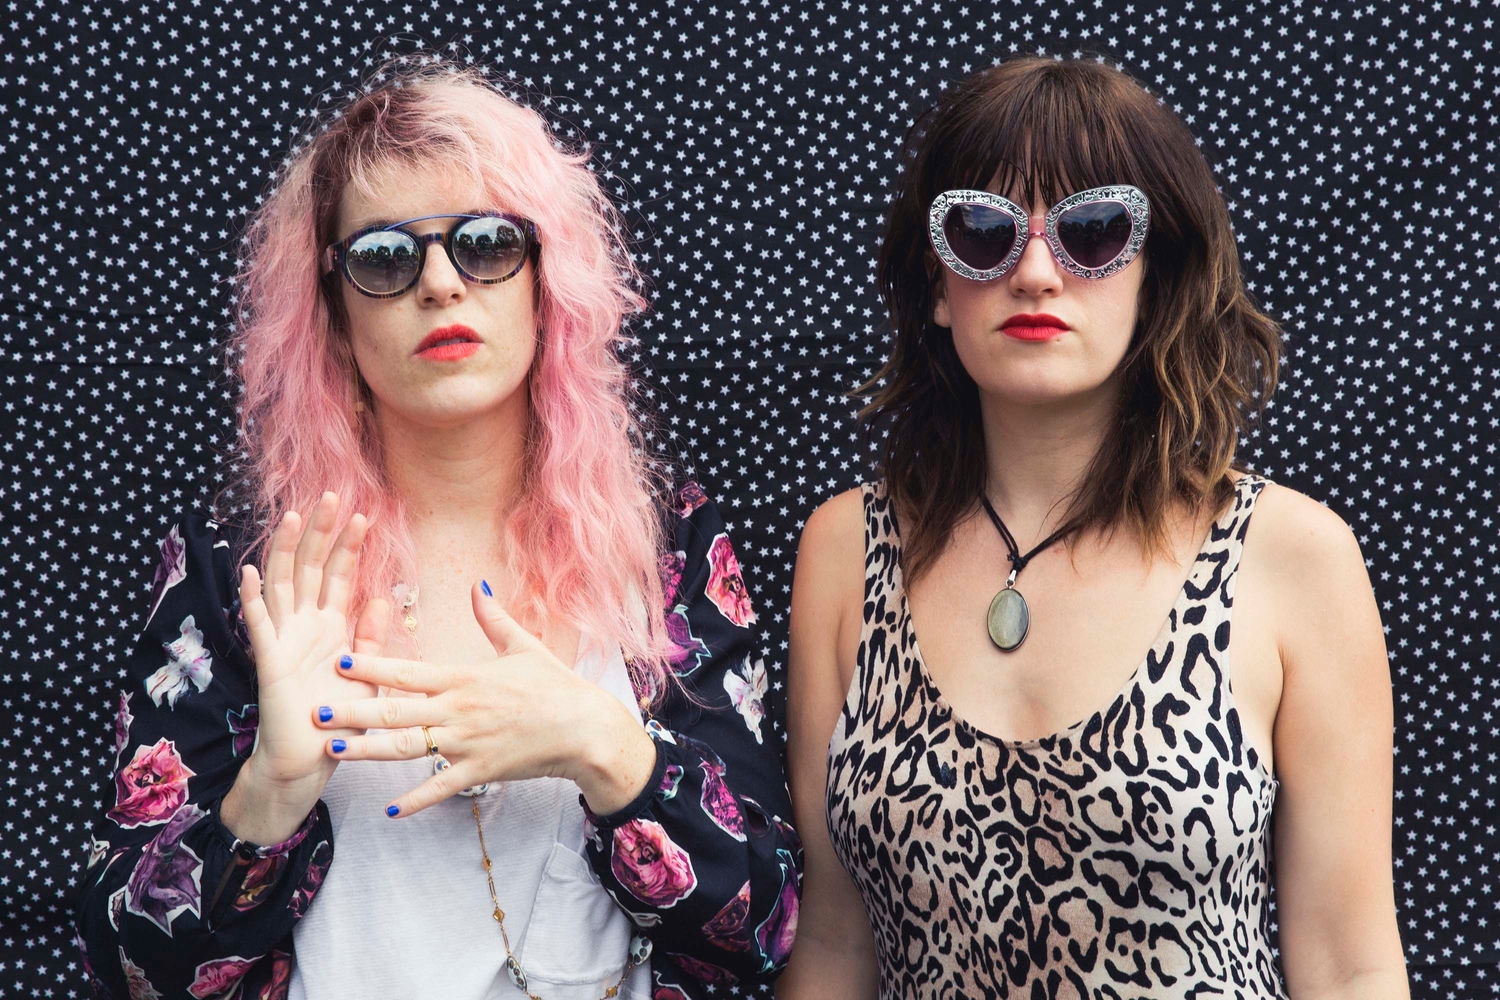 Deap Vally share ‘Two Seat Bike’ video